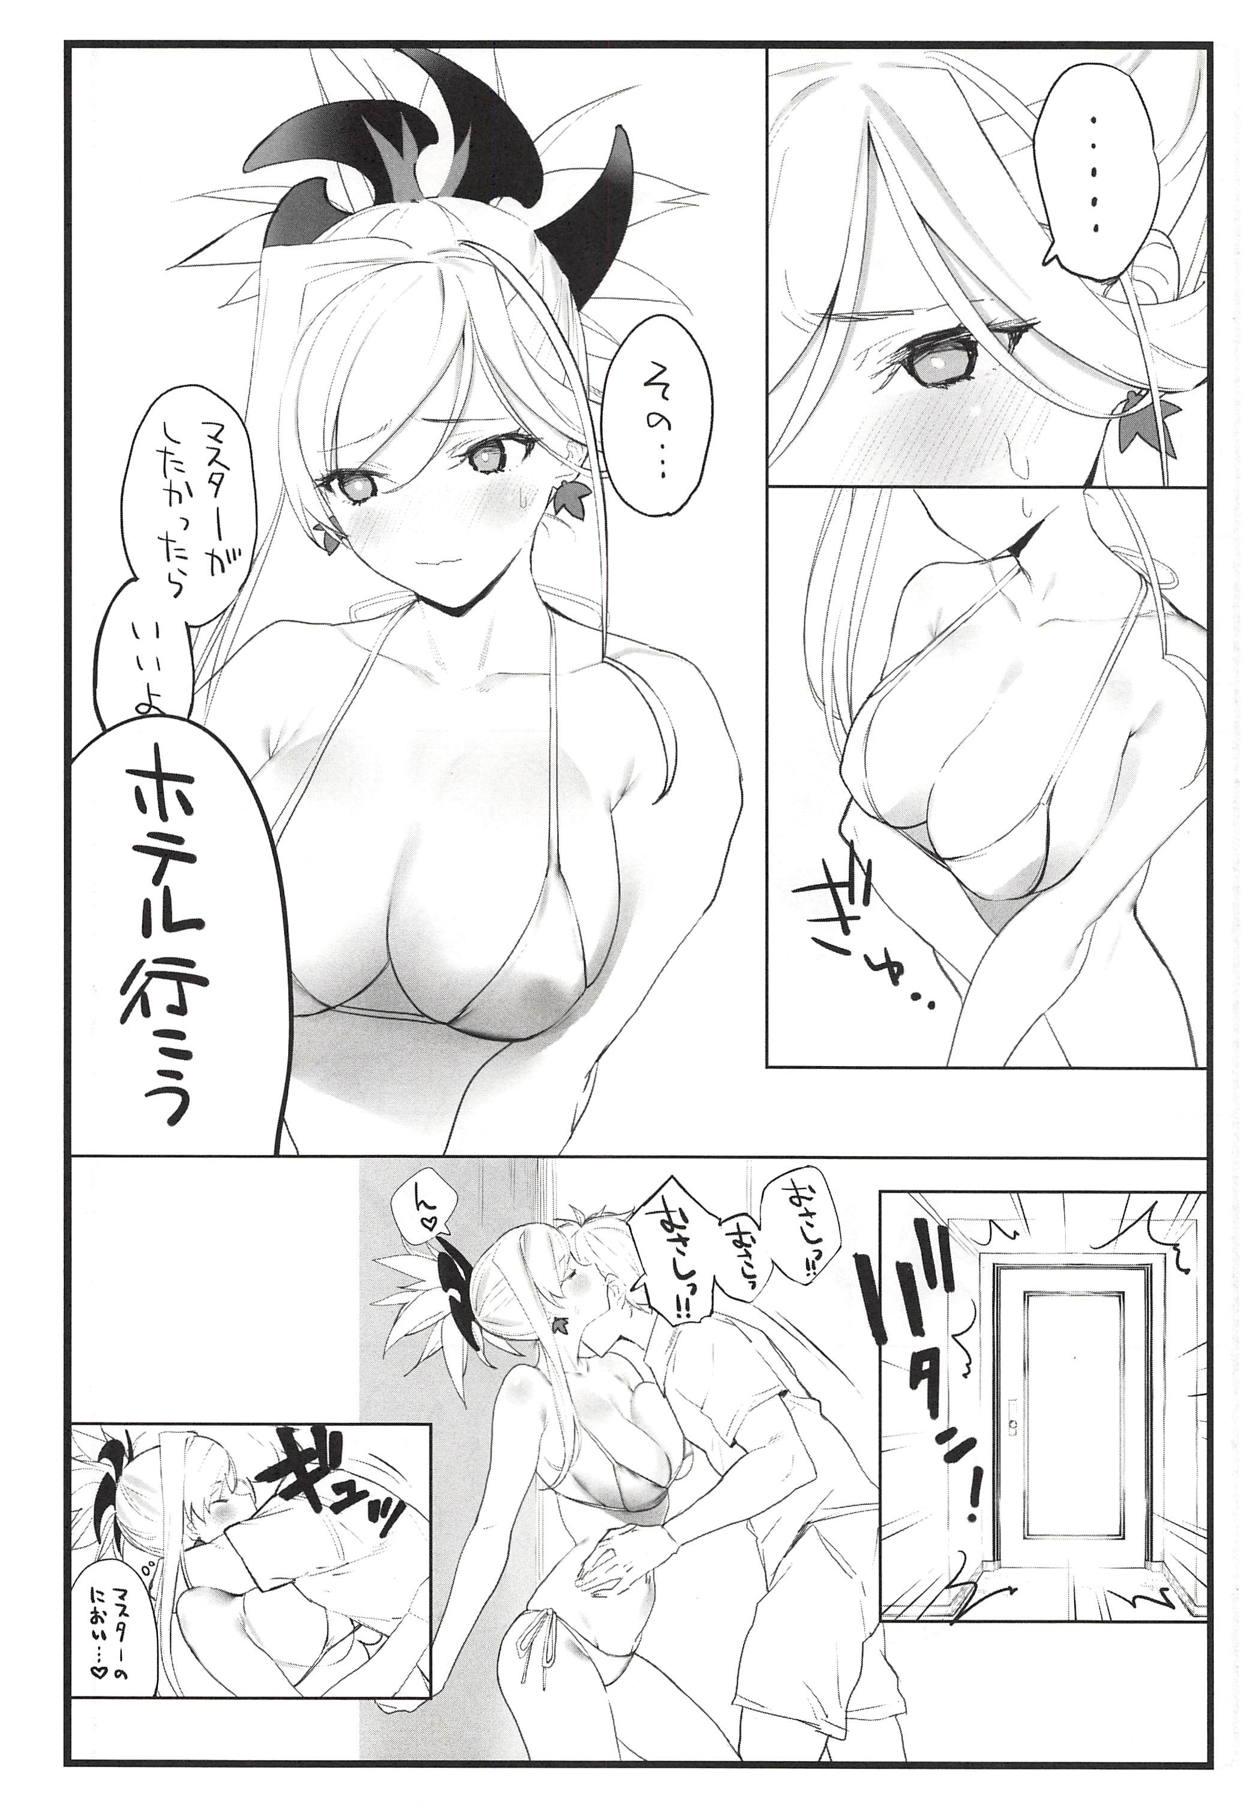 Abuse Musashi-chan no Hon - Fate grand order Punished - Page 7